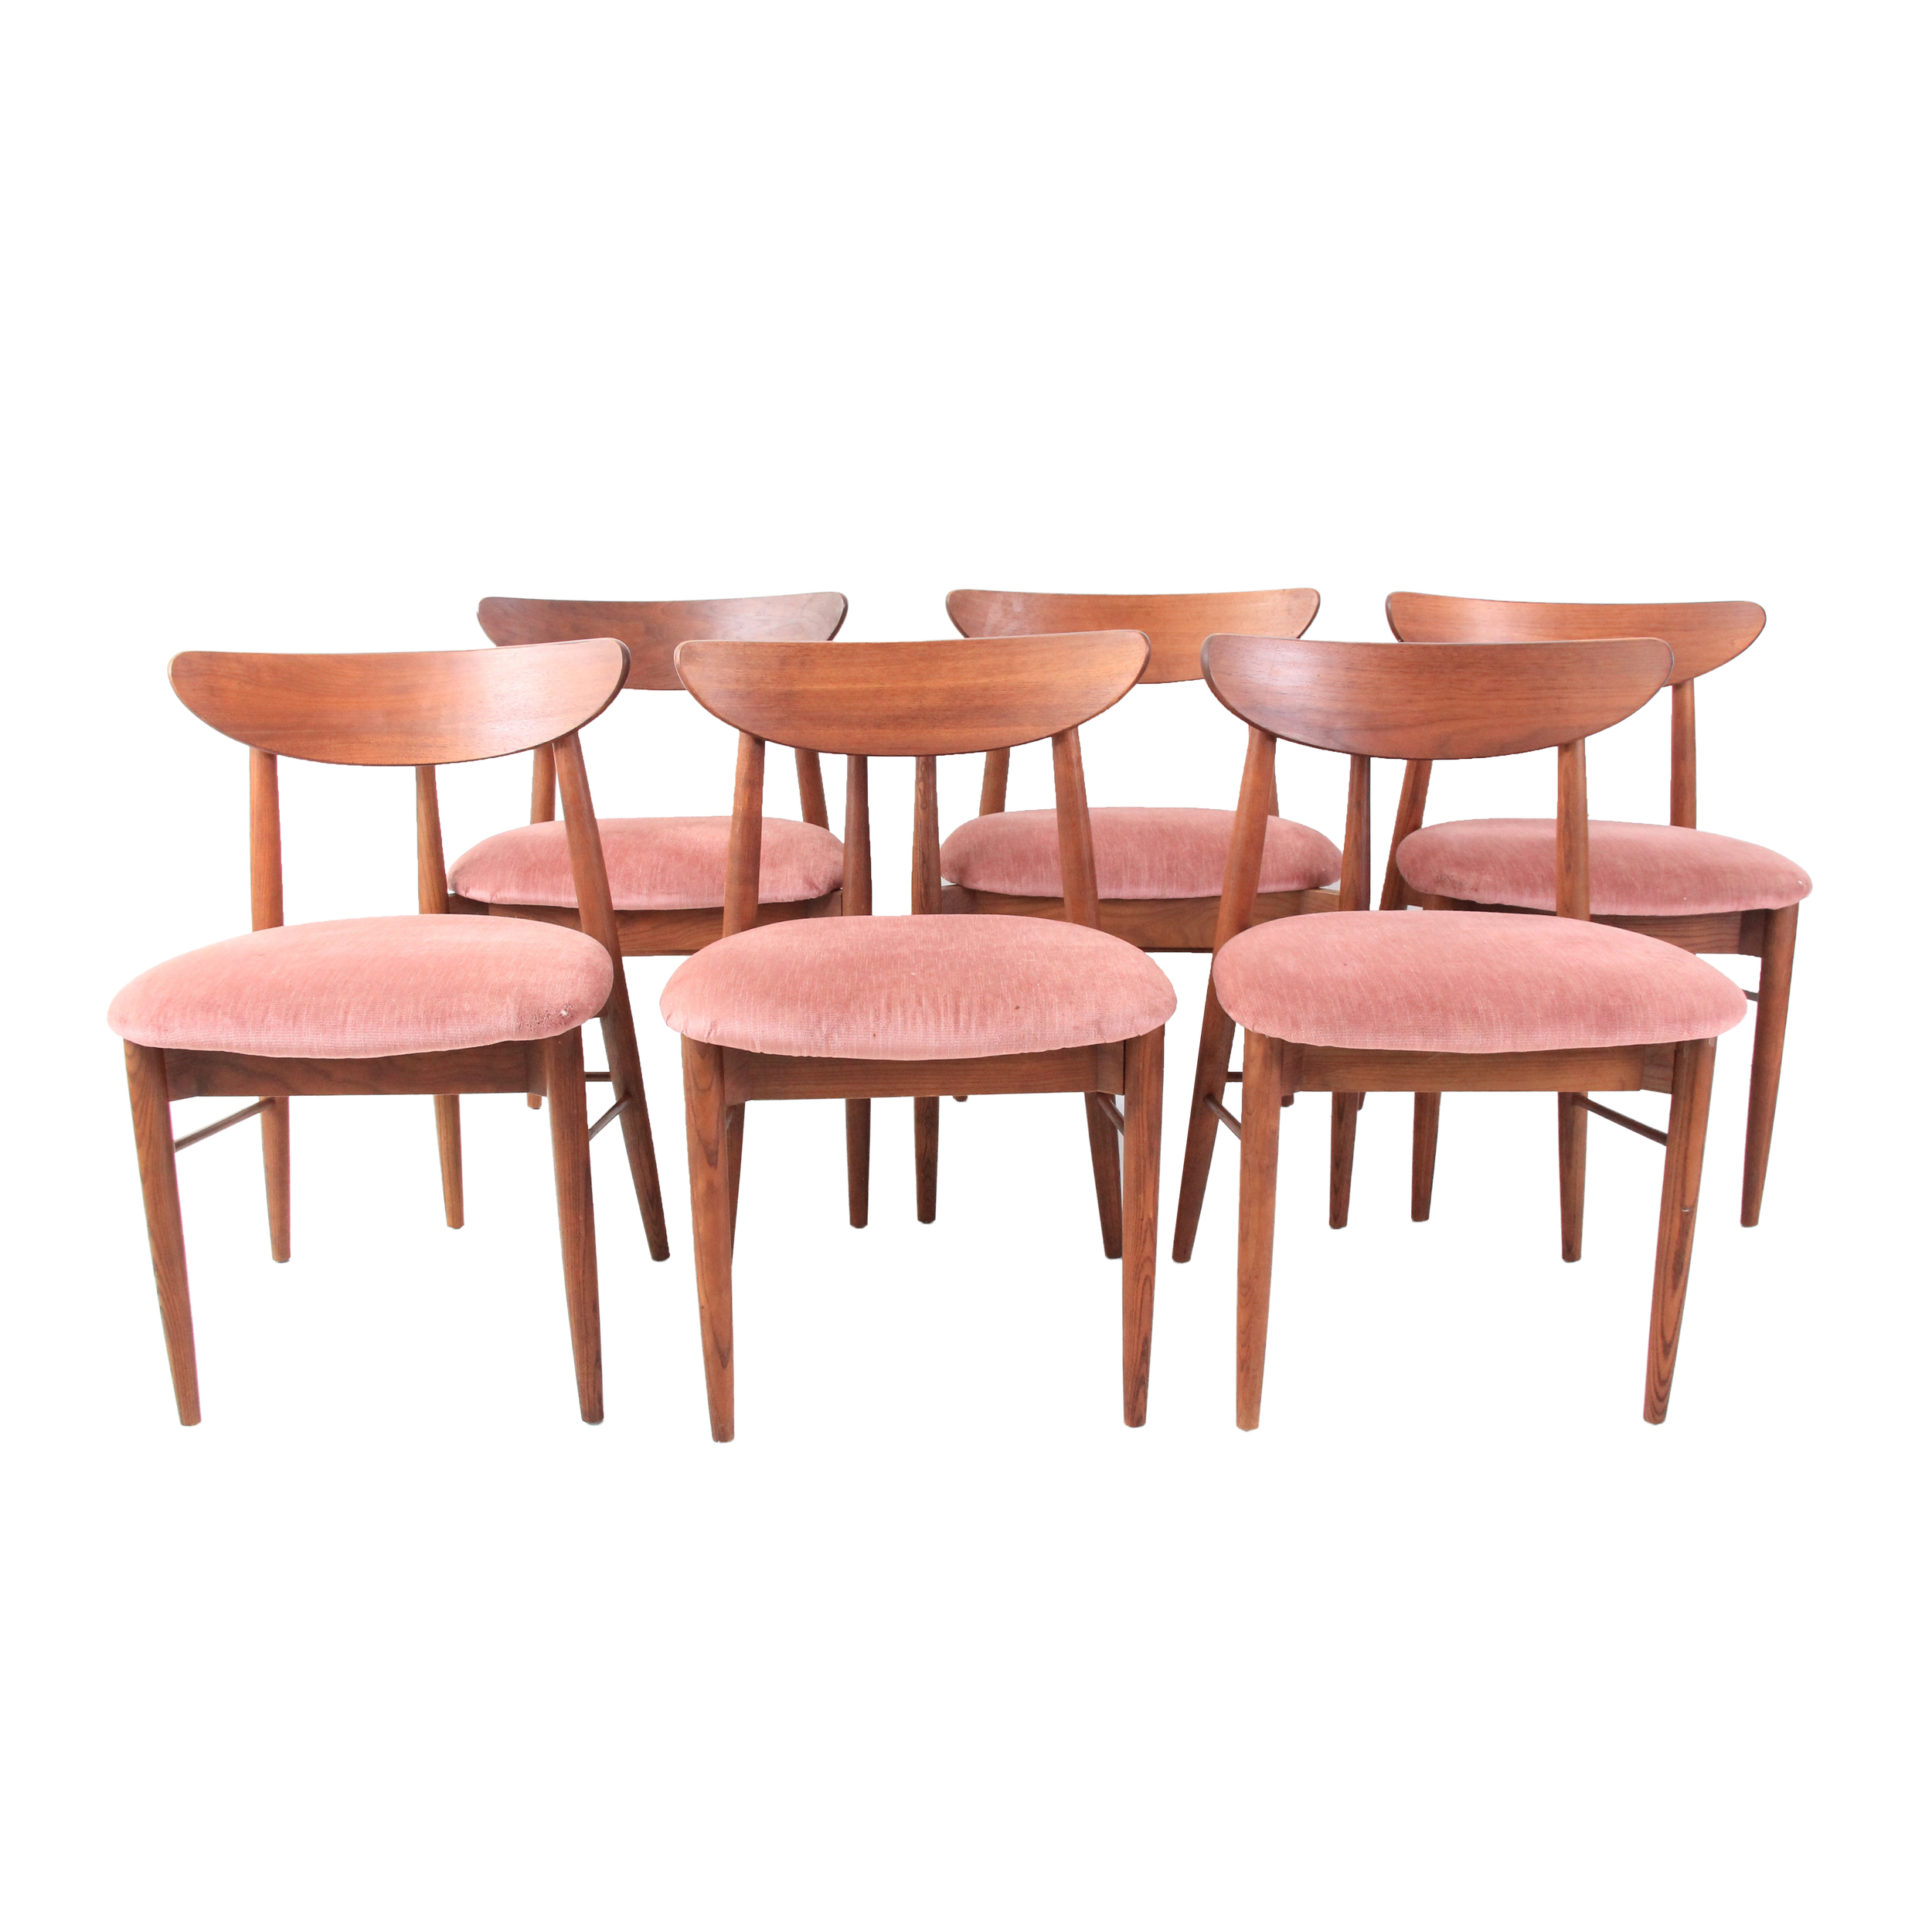 Set of 6 Vintage Mid Century Modern Dining Chairs 